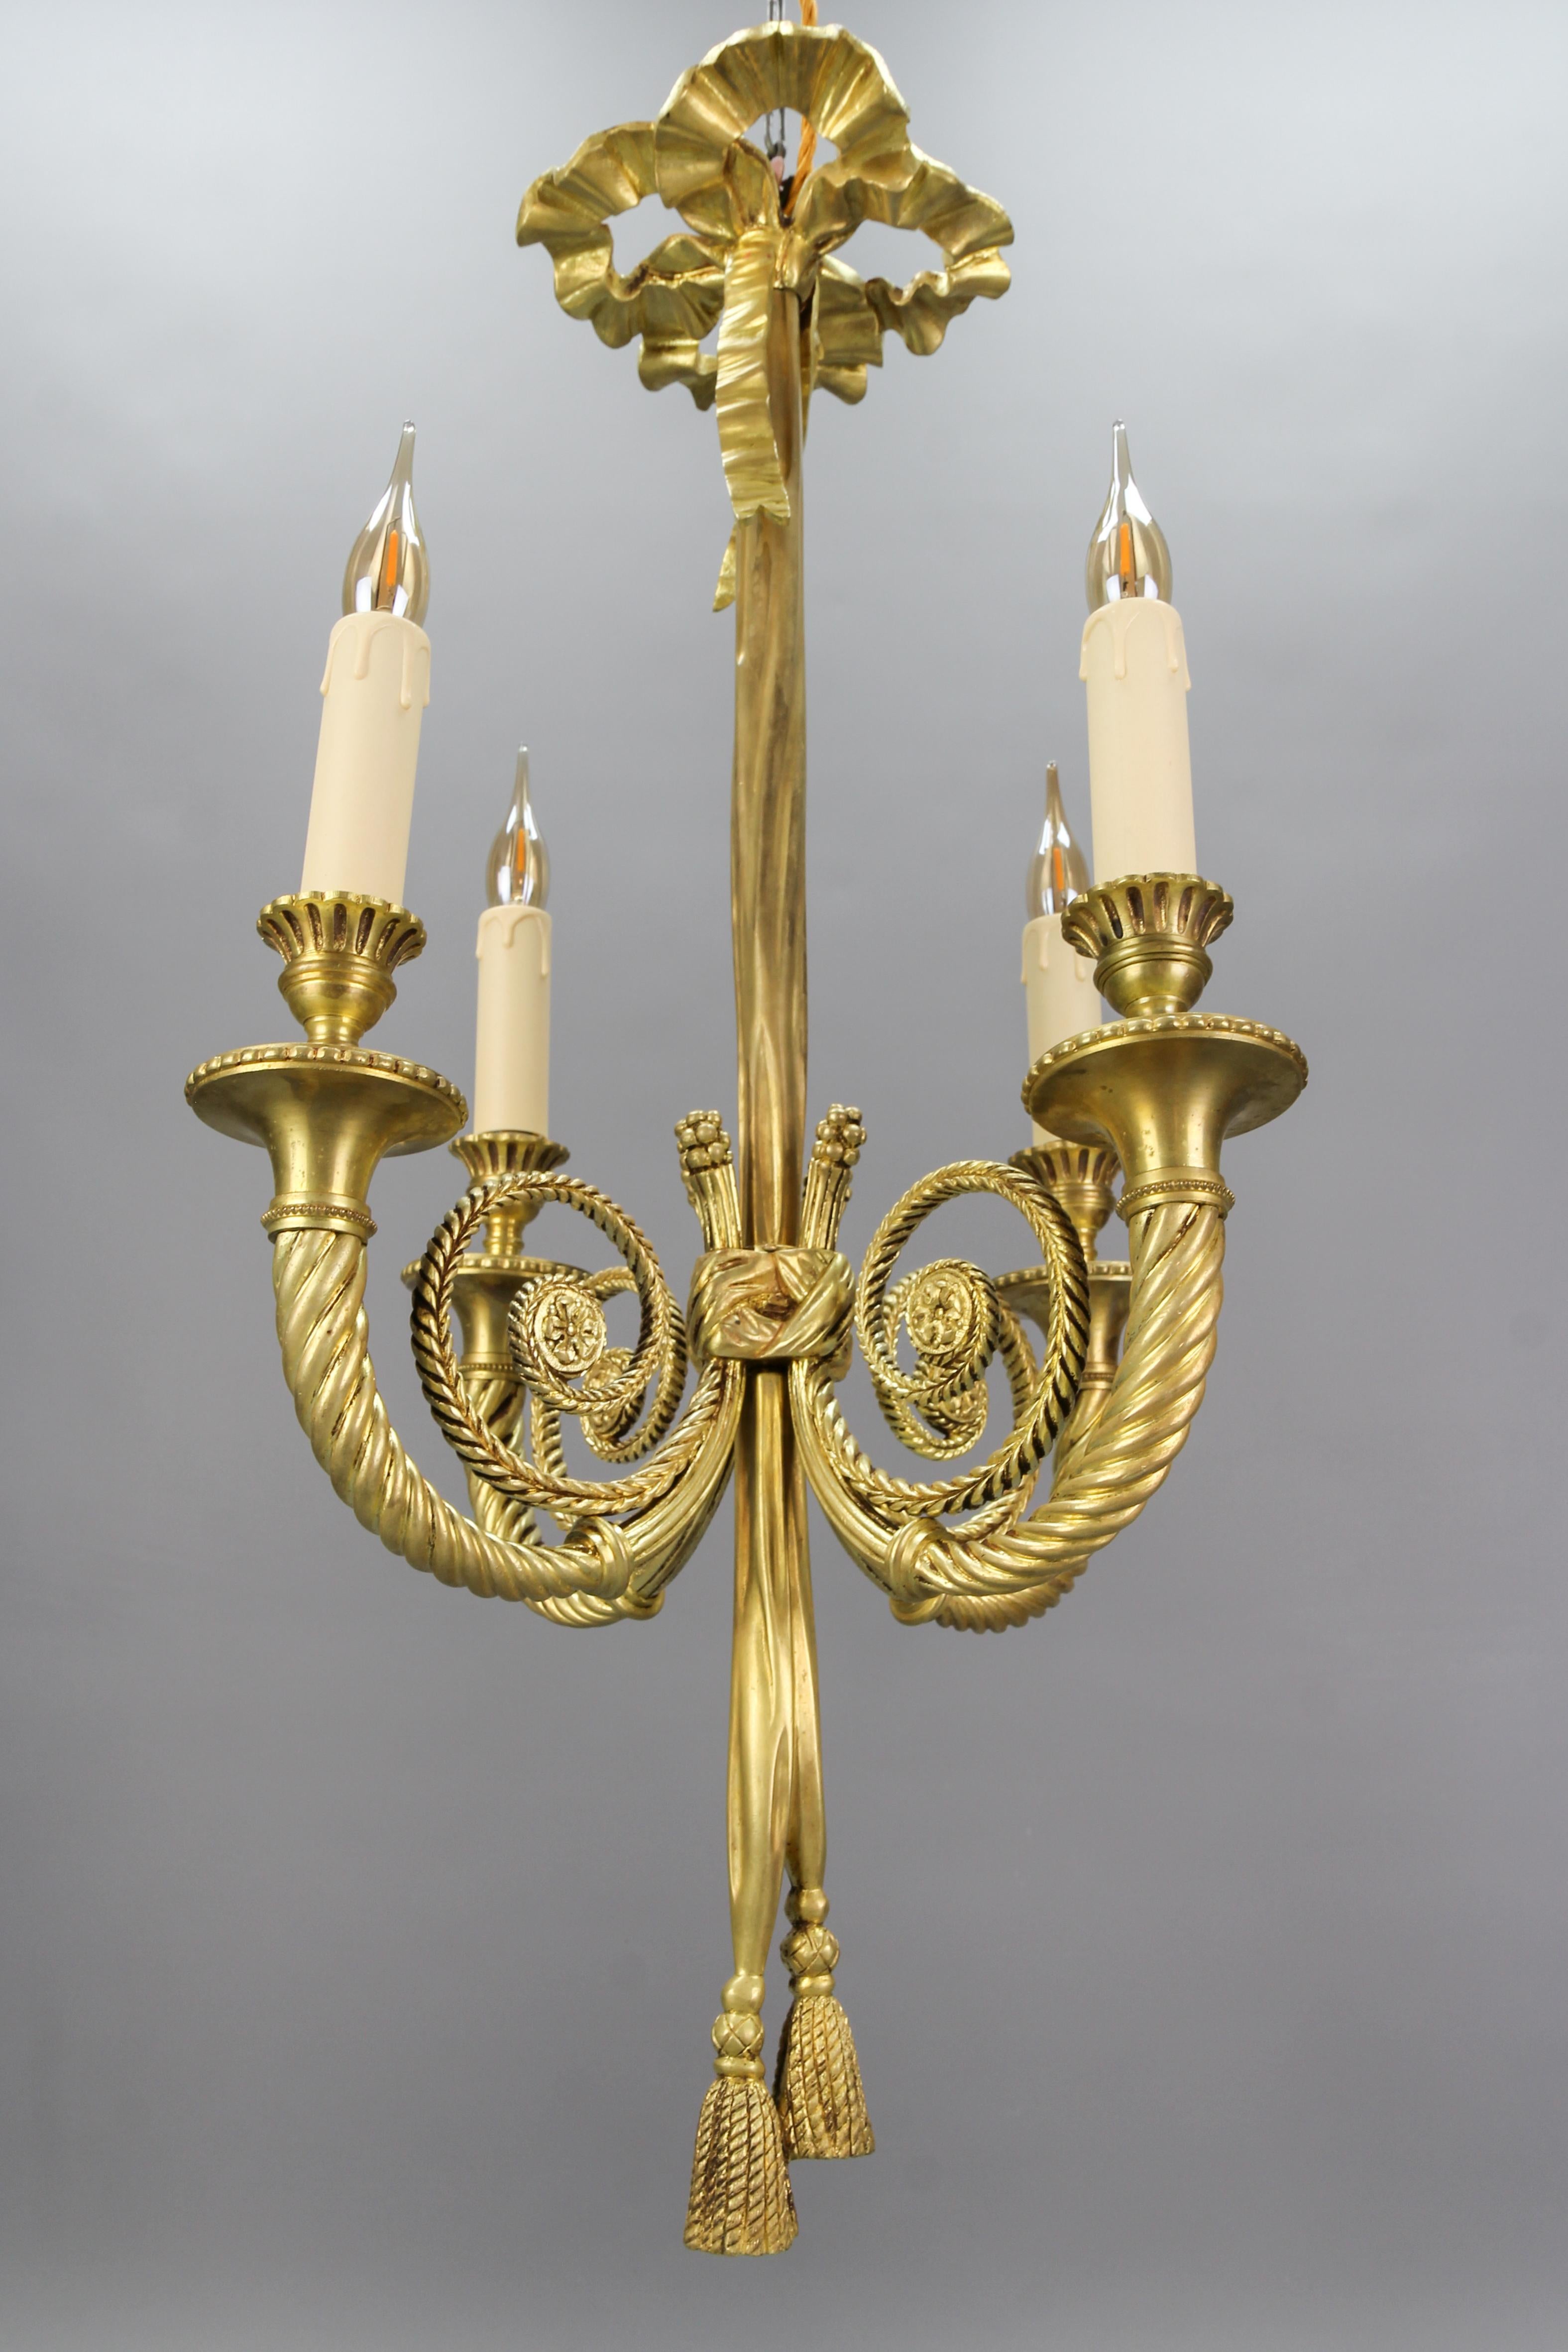 French Louis XVI style bronze four-light bow, ribbon, and tassel chandelier from the early 20th century.
An elegant Louis XVI or Neoclassical style bronze four-arm chandelier in the shape of knotted ribbons, with a bow on top, ending in tassels and